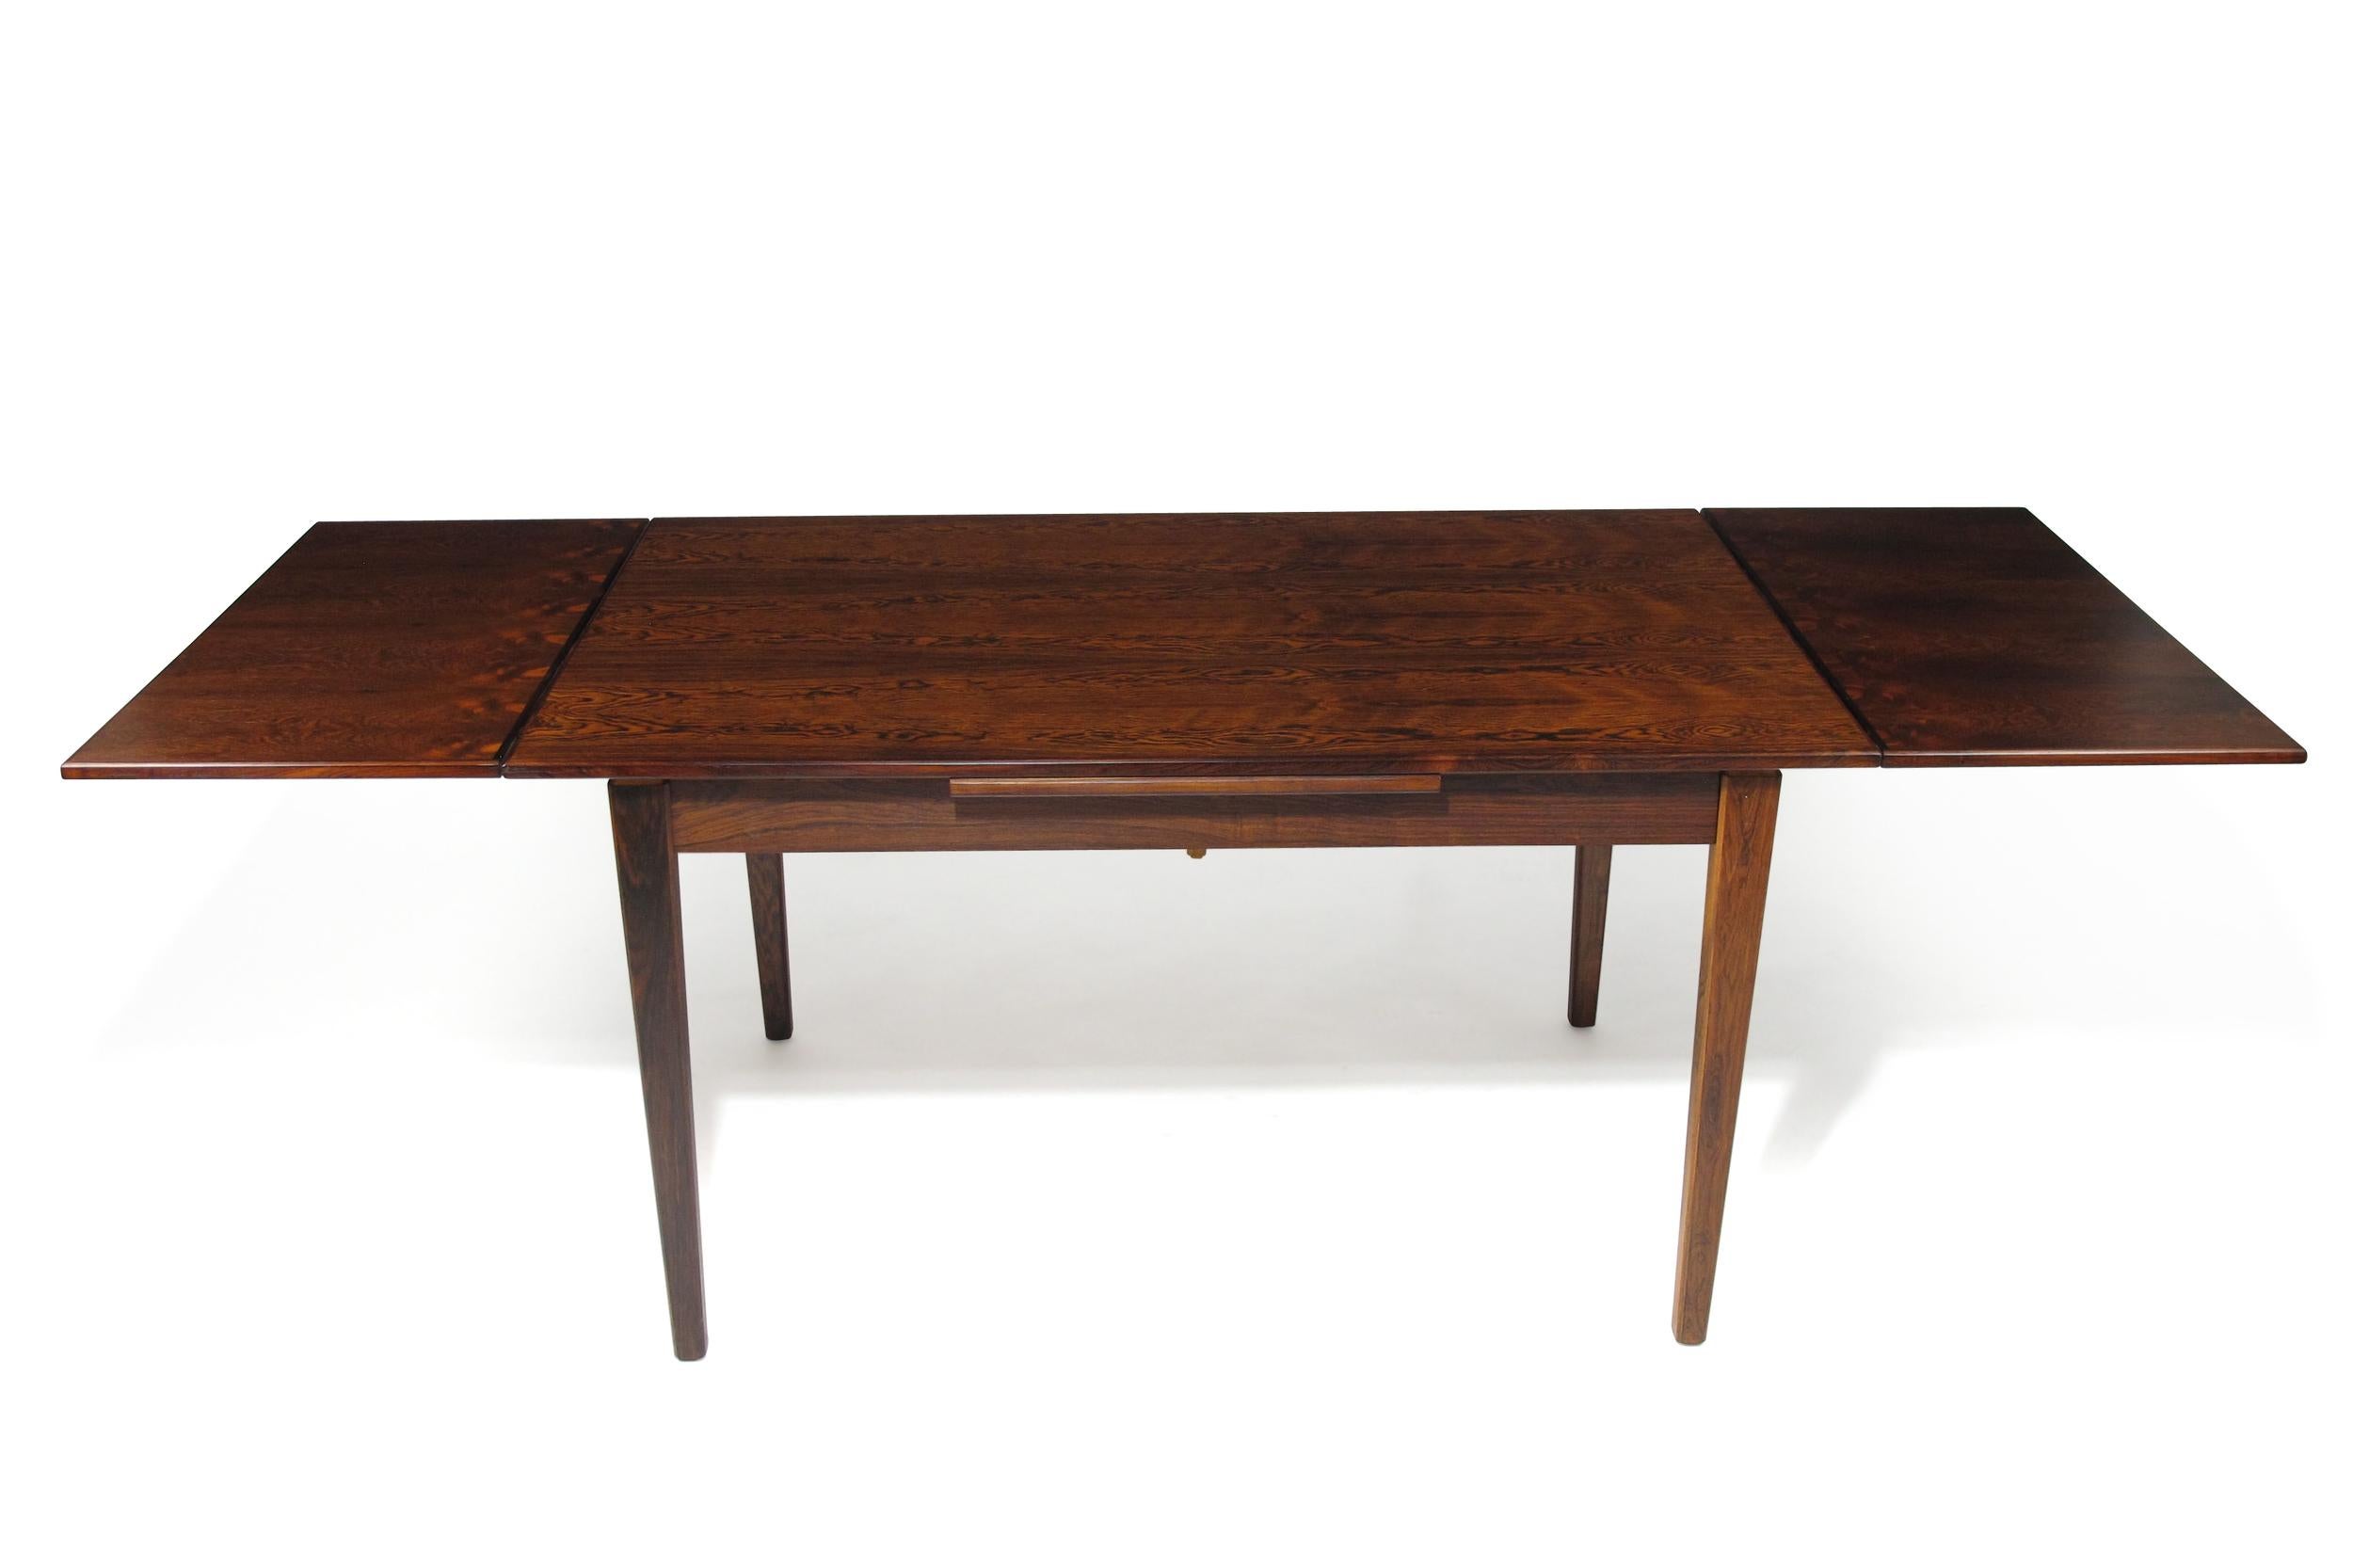 Midcentury Brazilian Rosewood dining table with draw-leaves manufactured in Denmark circa 1955. Dining table crafted of dark rosewood dramatic grain.Seats six closed, up to ten guests with pull-out leaves extended. Finely restored in a natural oil